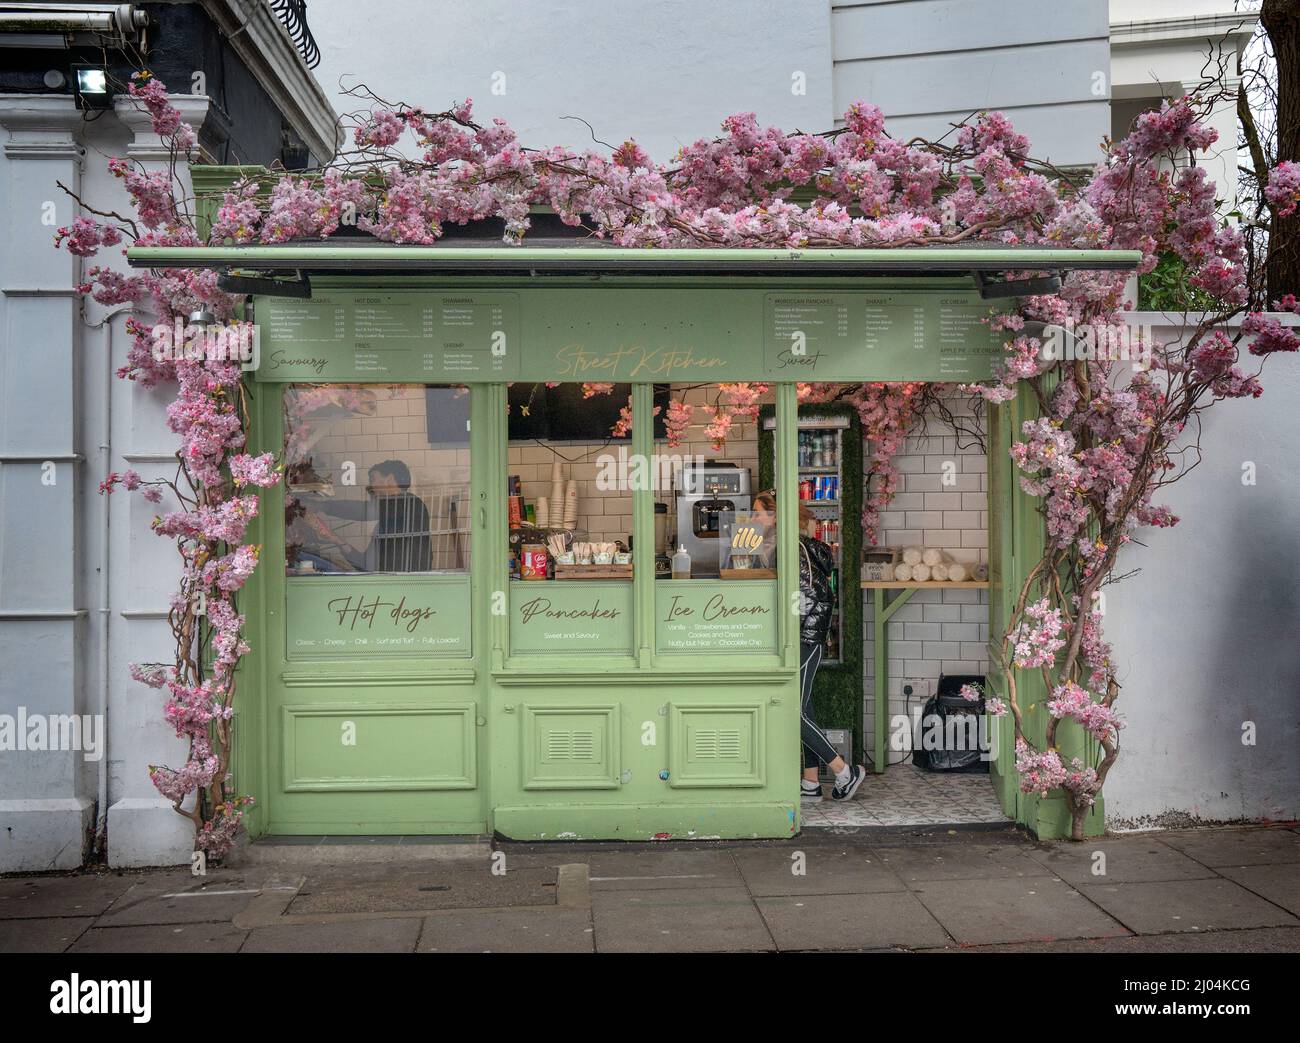 Street cafe in Notting Hill, London surrounded by cherry blossom. Stock Photo